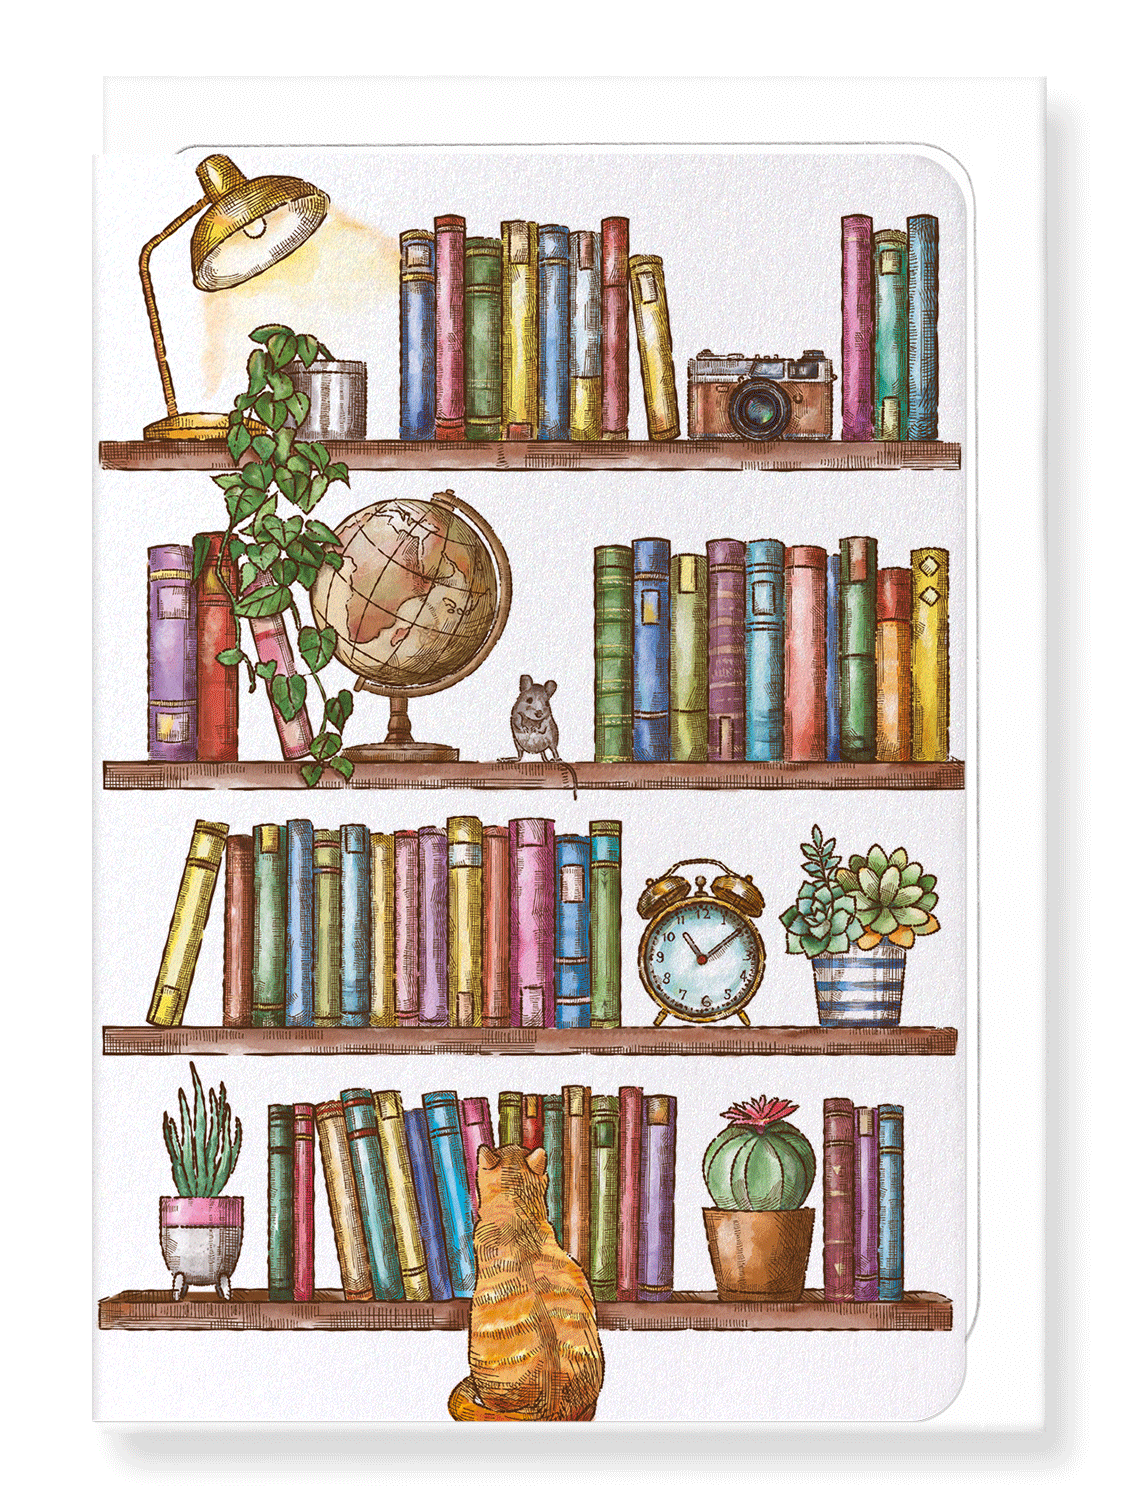 Ezen Designs - Bookshelf with cat and mouse - Greeting Card - Front